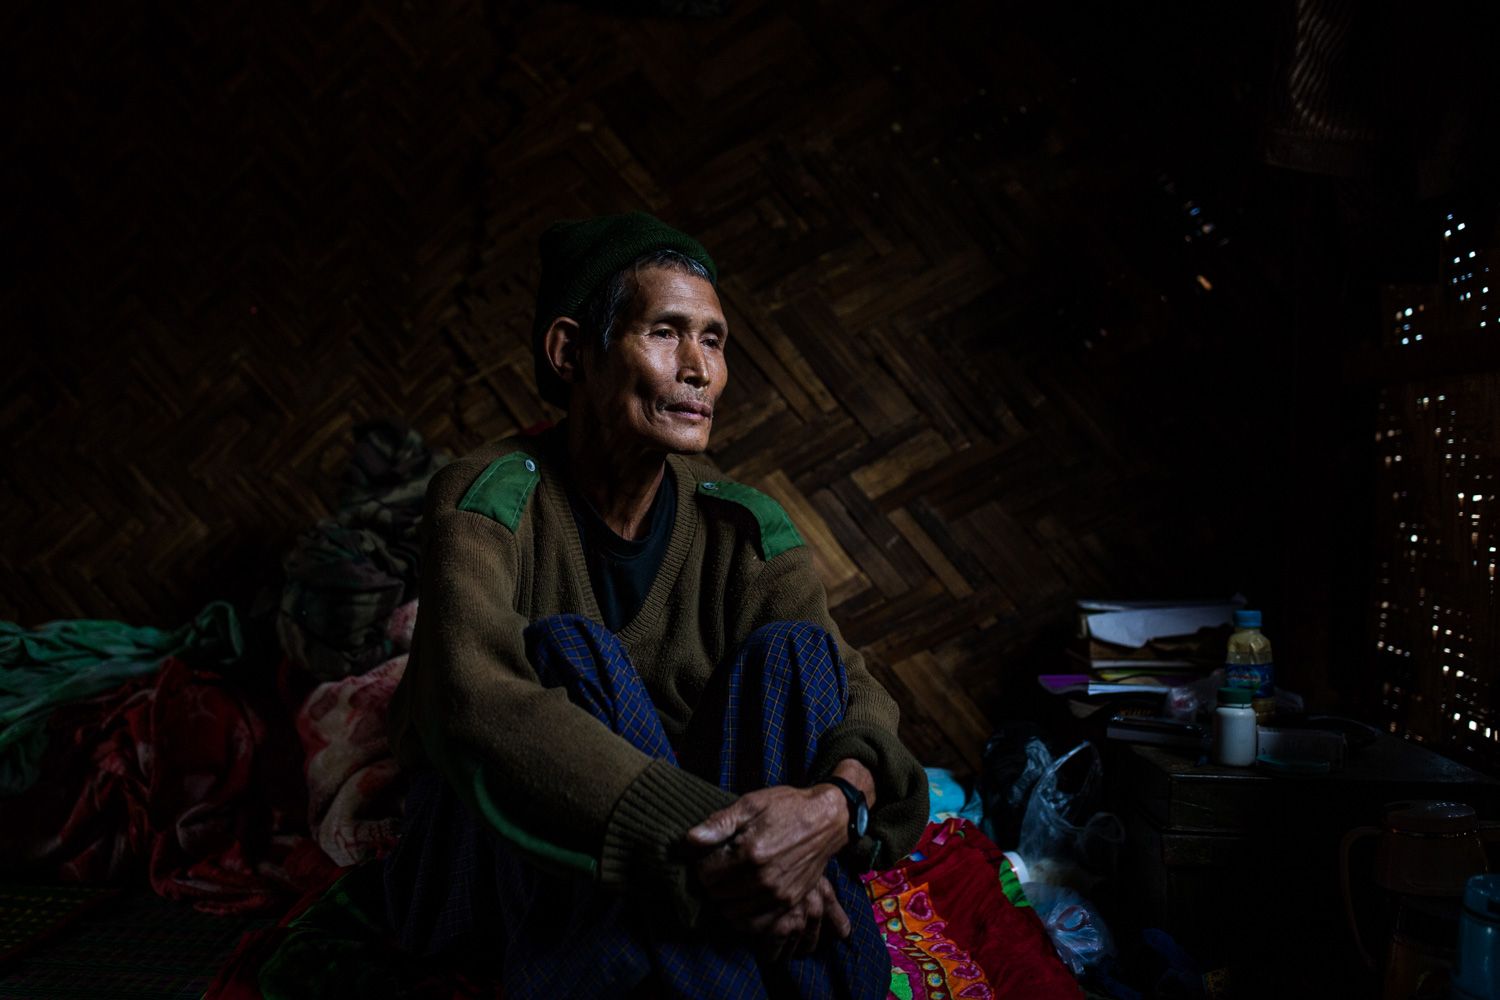 Dawng Hkawng, who was displaced by the Chipwi dam project in 2012, sits in his small room in the Chipwi internally displaced persons camp in Chipwi, Kachin State, Myanmar. Image by Hkun Lat. Myanmar, 2019.